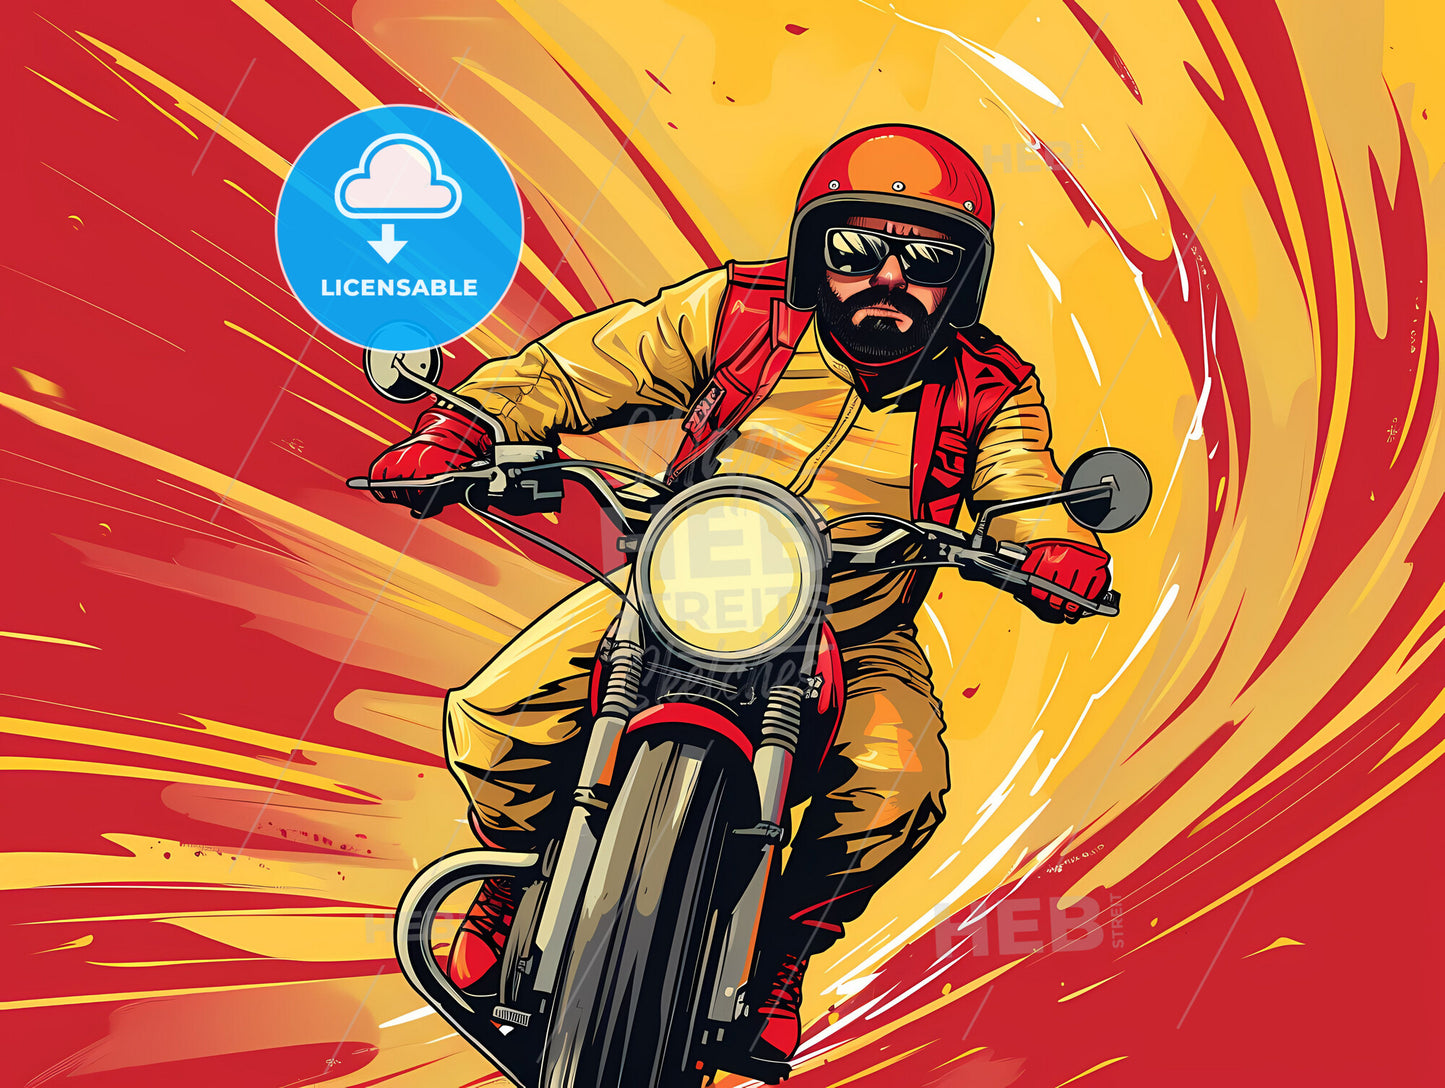 Expressive delivery concept art featuring a motorcyclist in yellow uniform, glasses, and vibrant colors